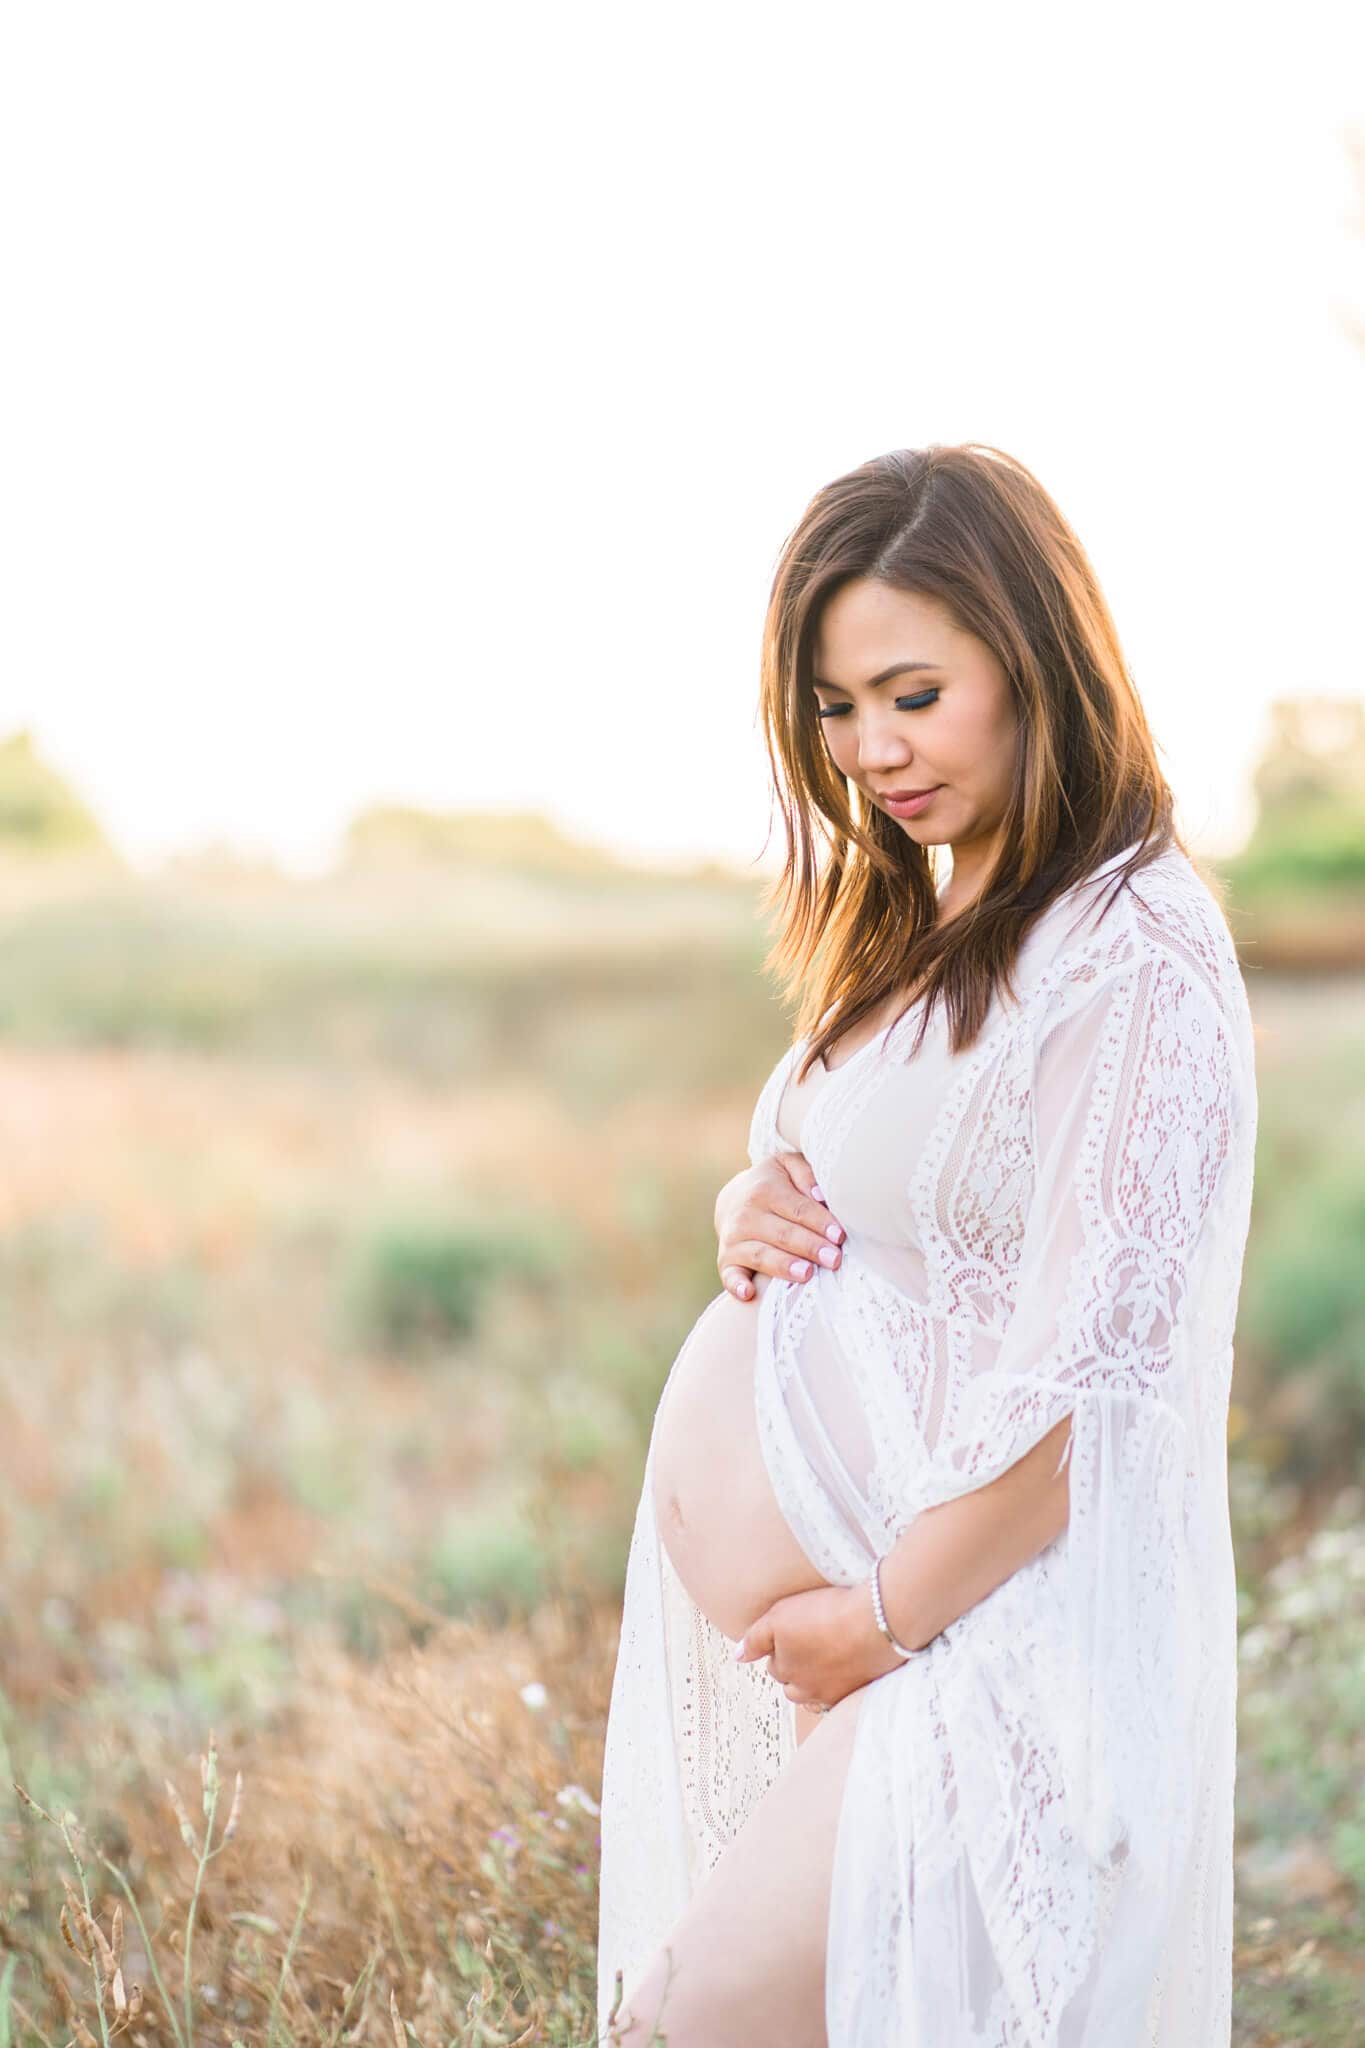 Pregnant mom in white dress showing her pregnant belly standing in a grassy field outdoors. Orange Coast Women's Medical Group